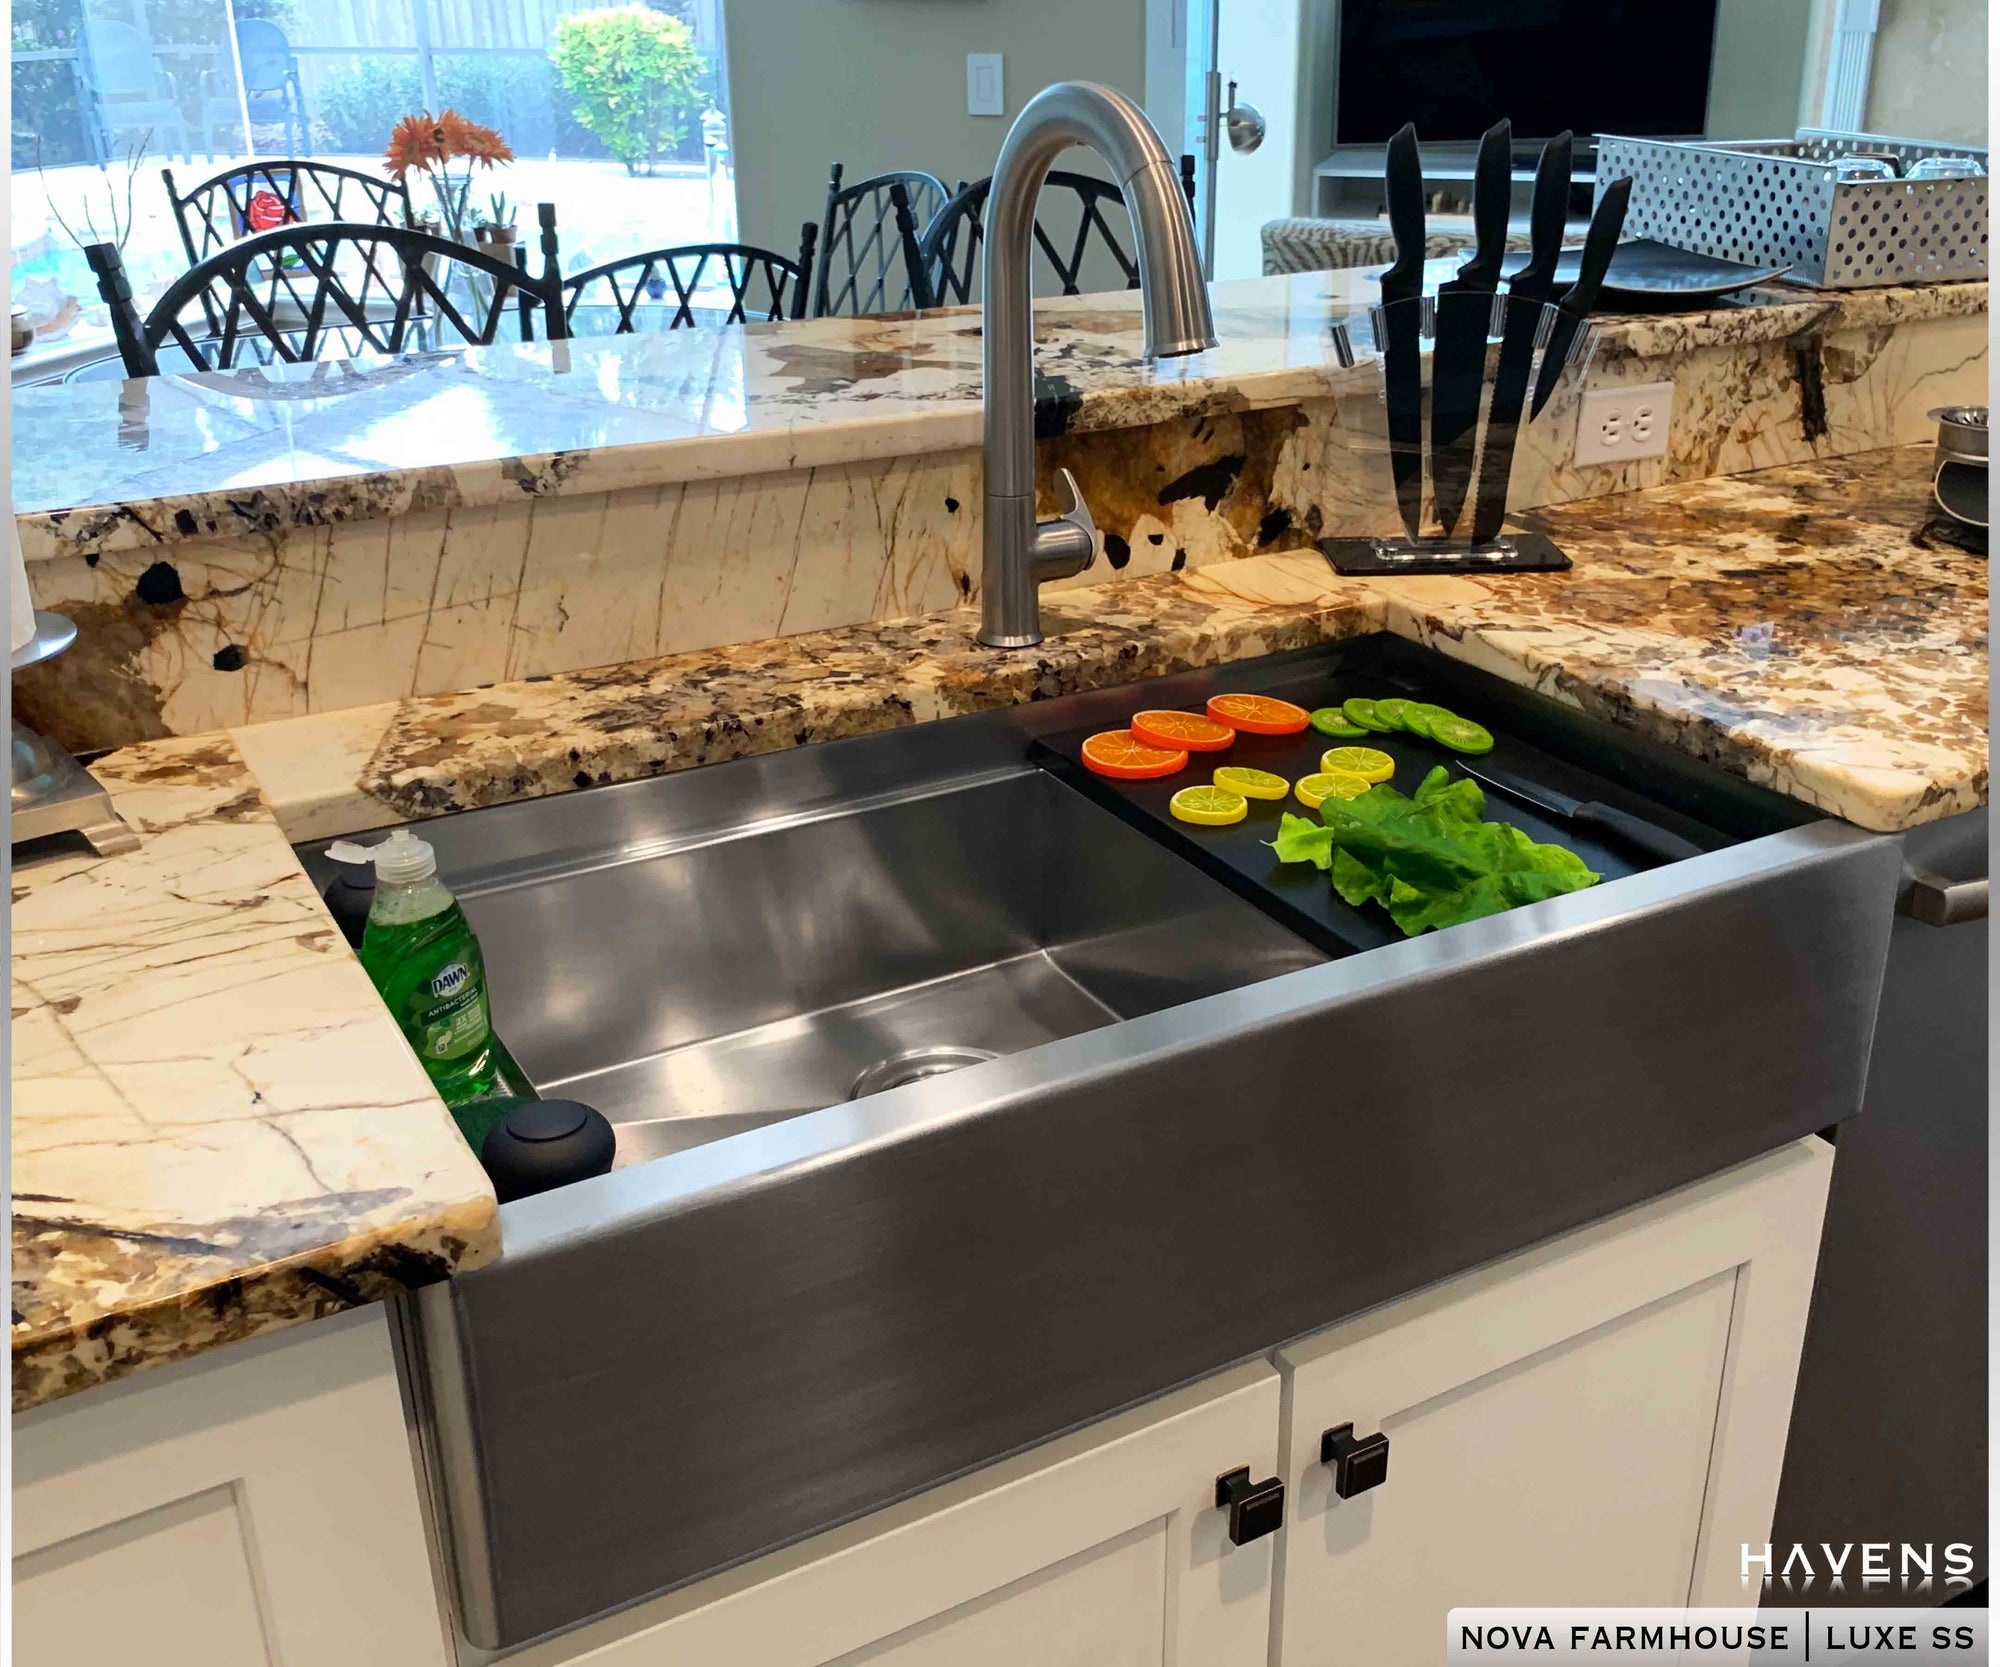 Legacy Farmhouse Sink - Luxe Stainless